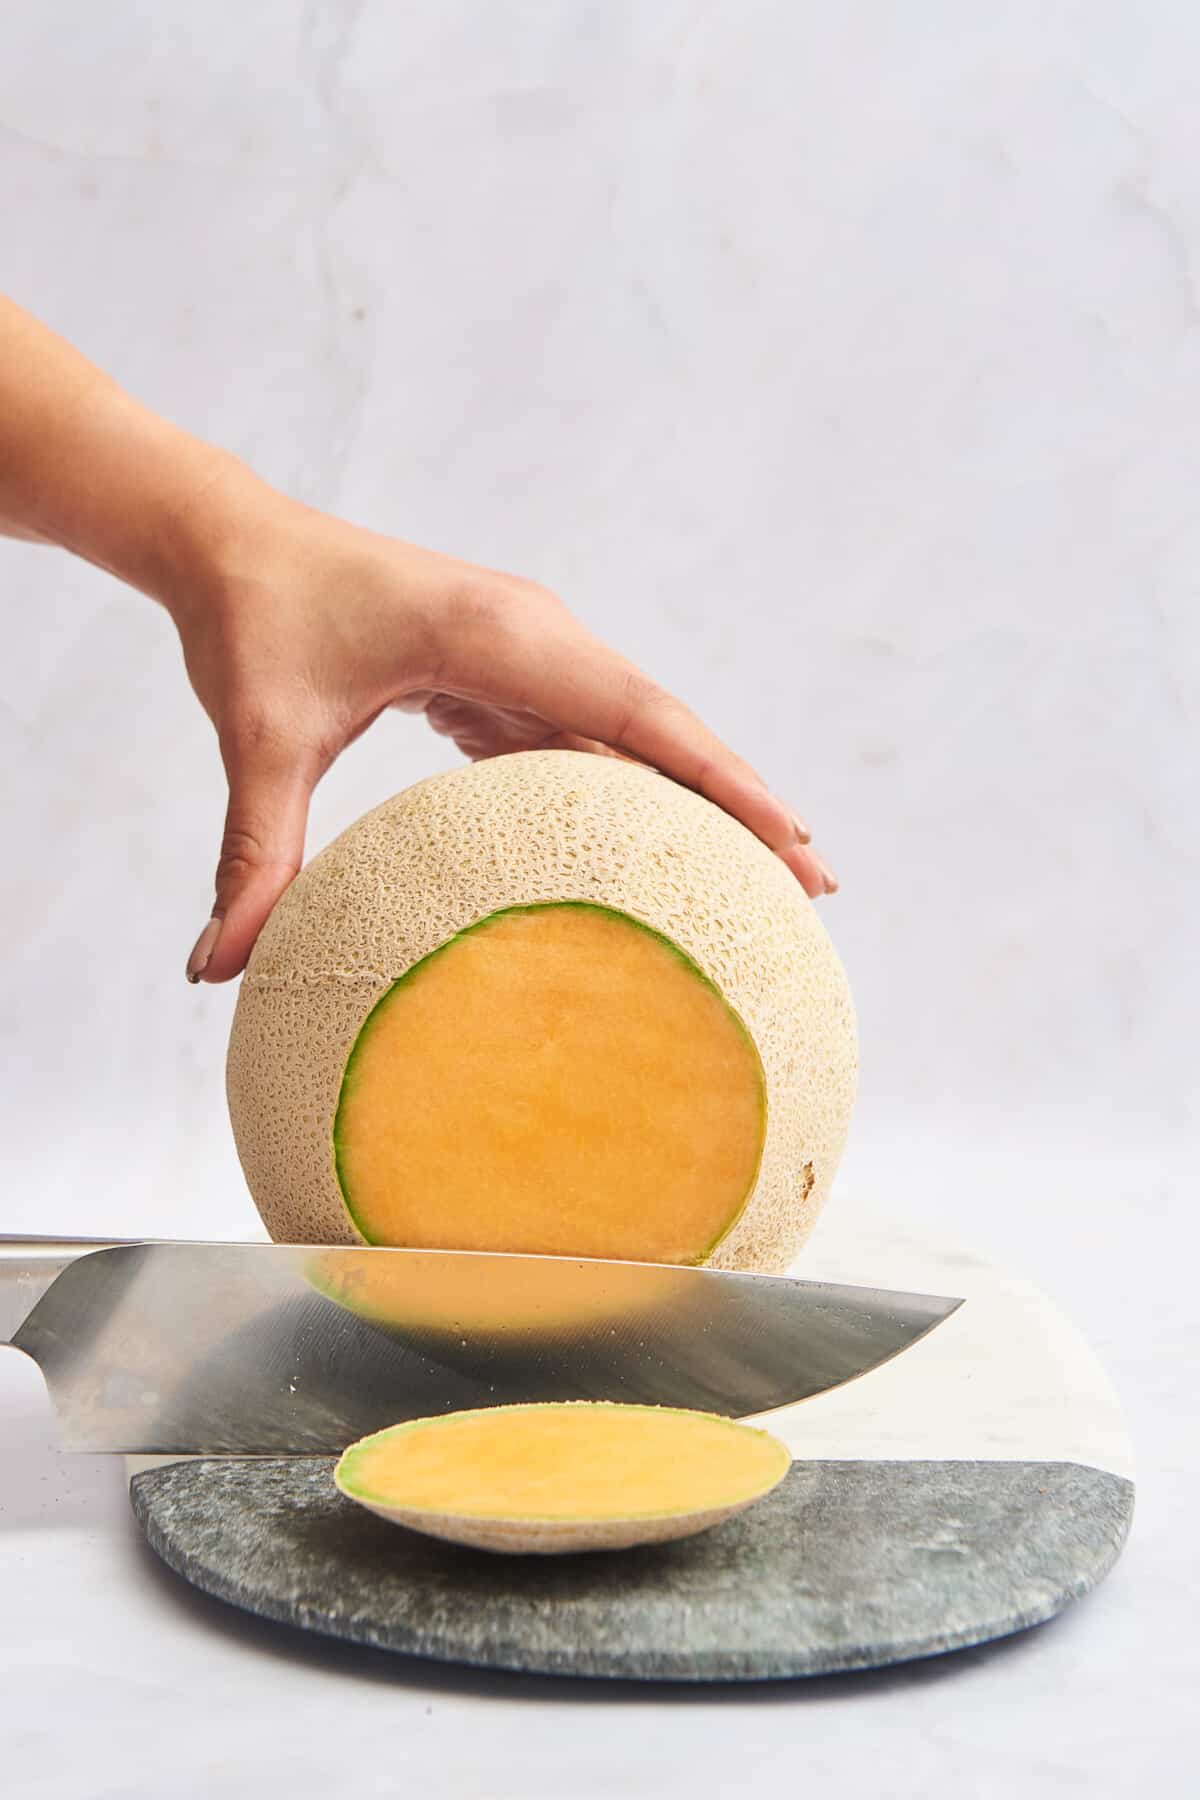 The end being trimmed off a cantaloupe. 